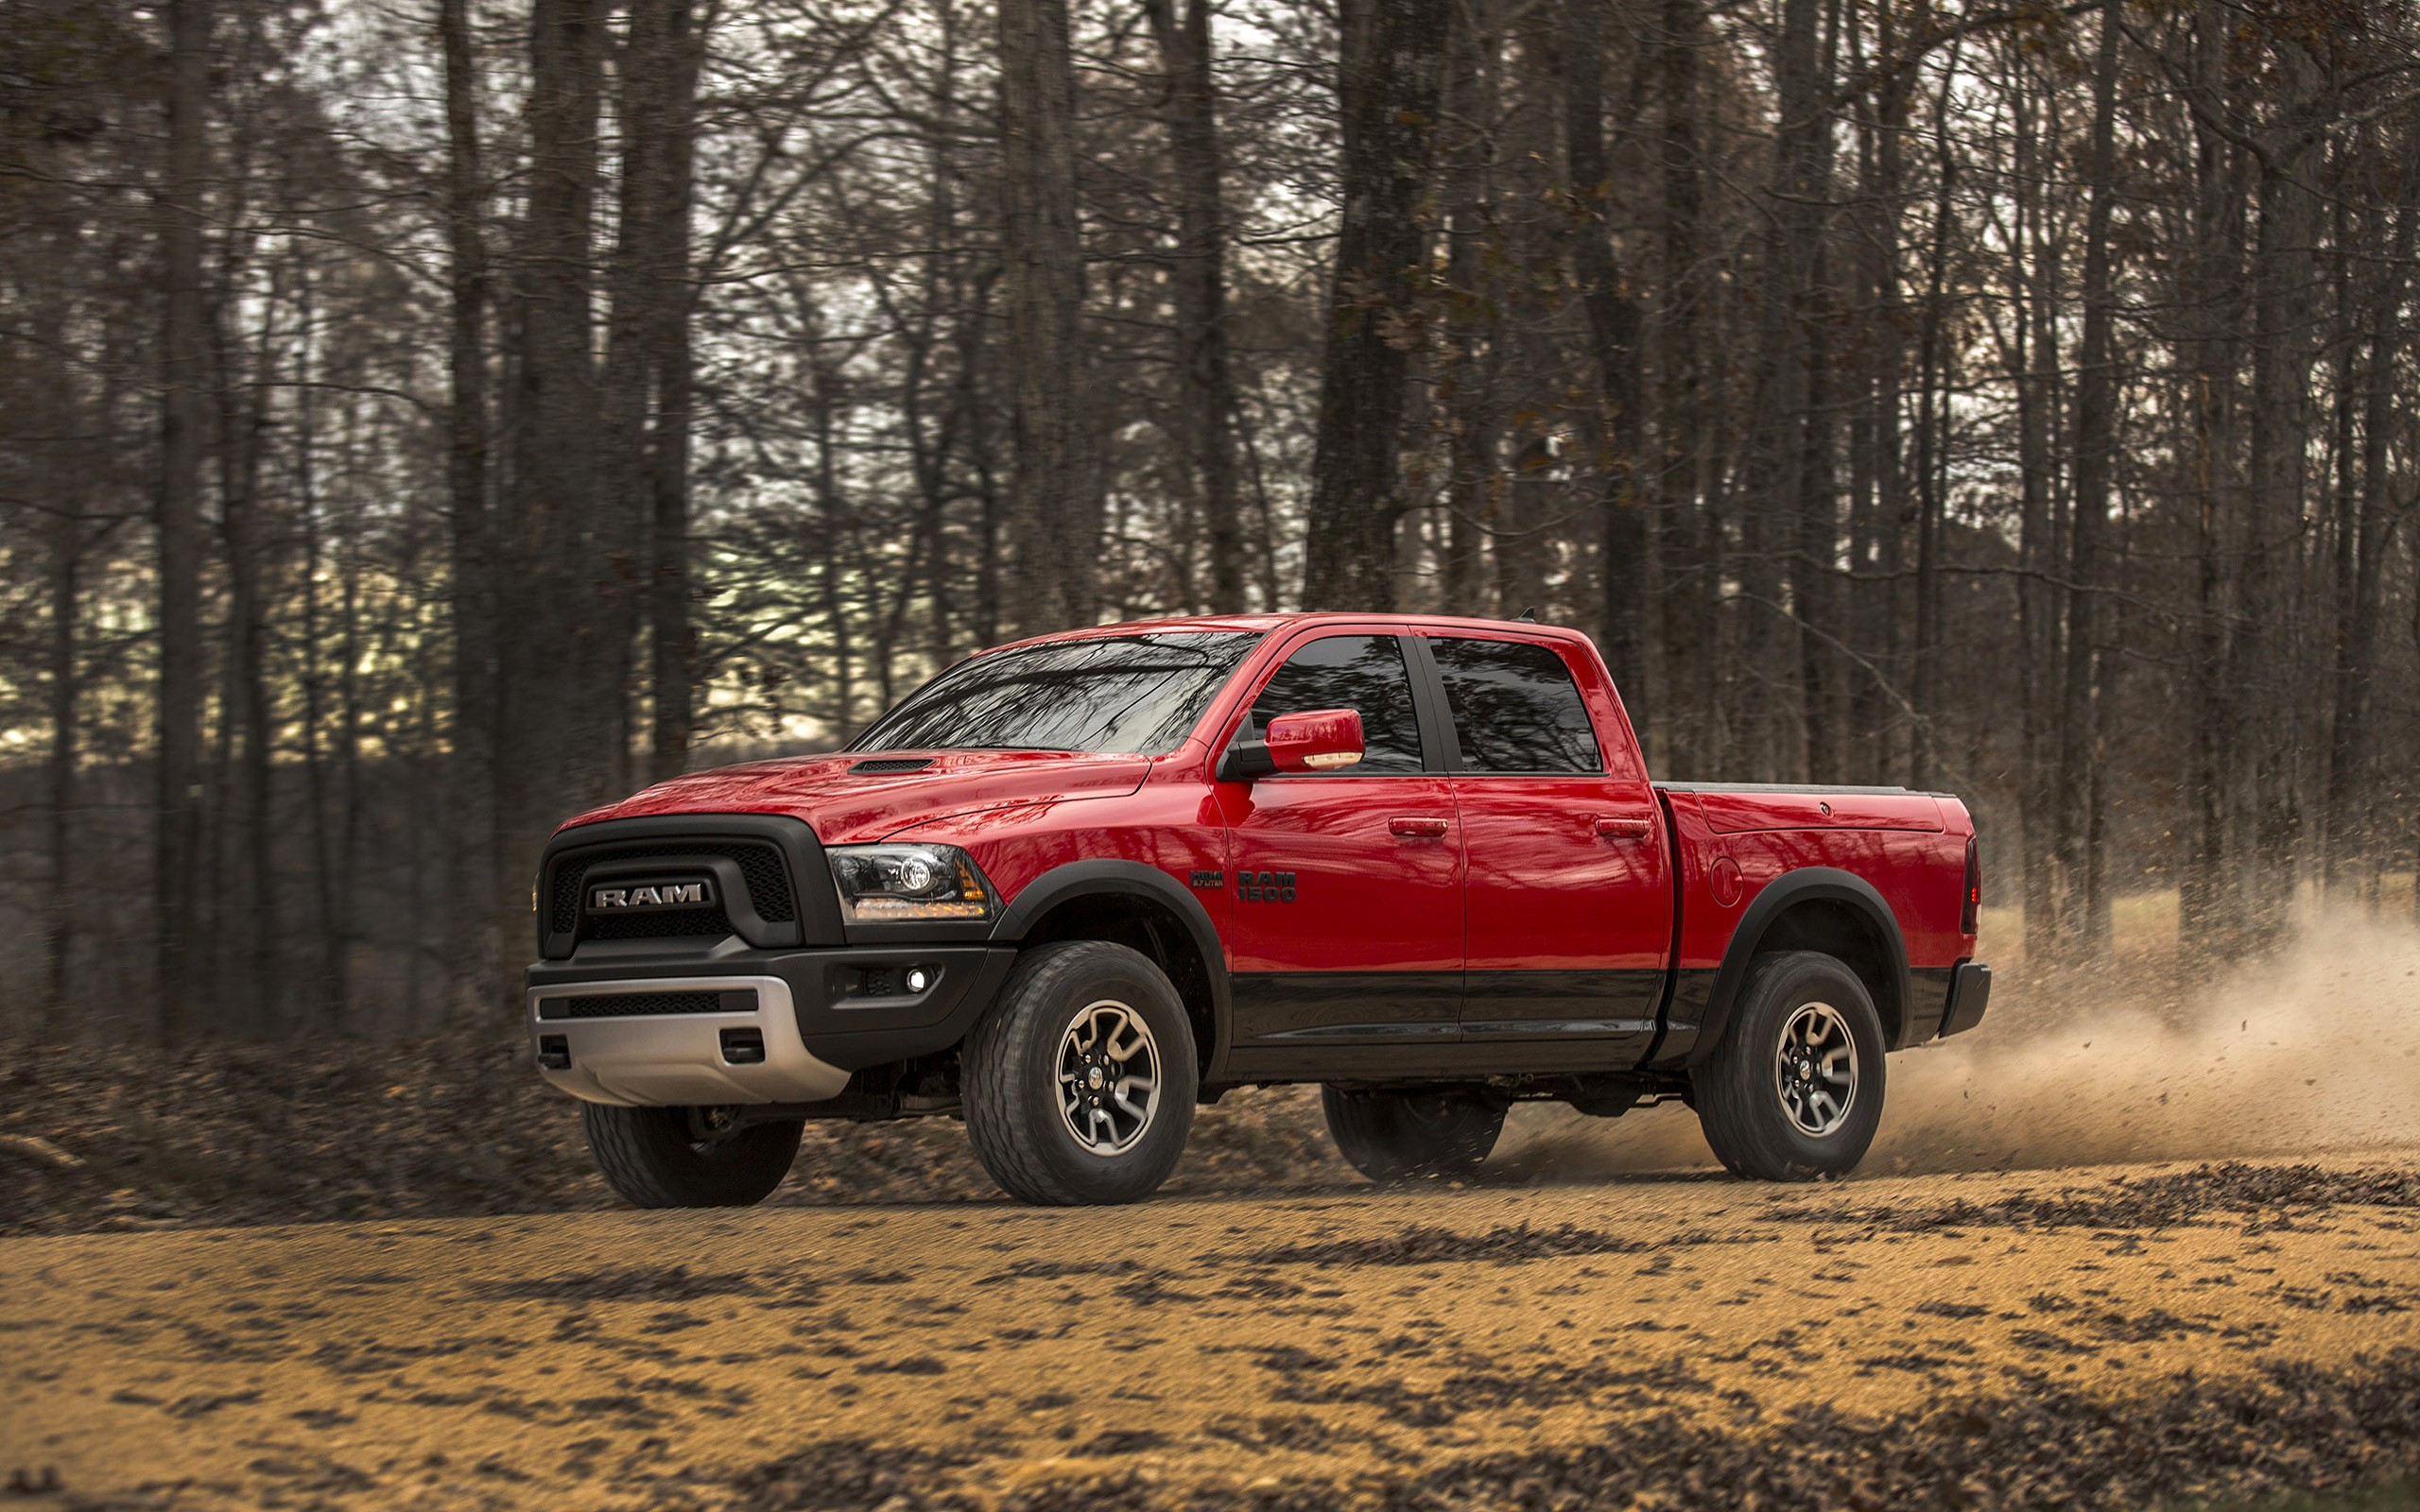 Ford Pickup Truck - 2017 Ram 1500 Rebel Red , HD Wallpaper & Backgrounds